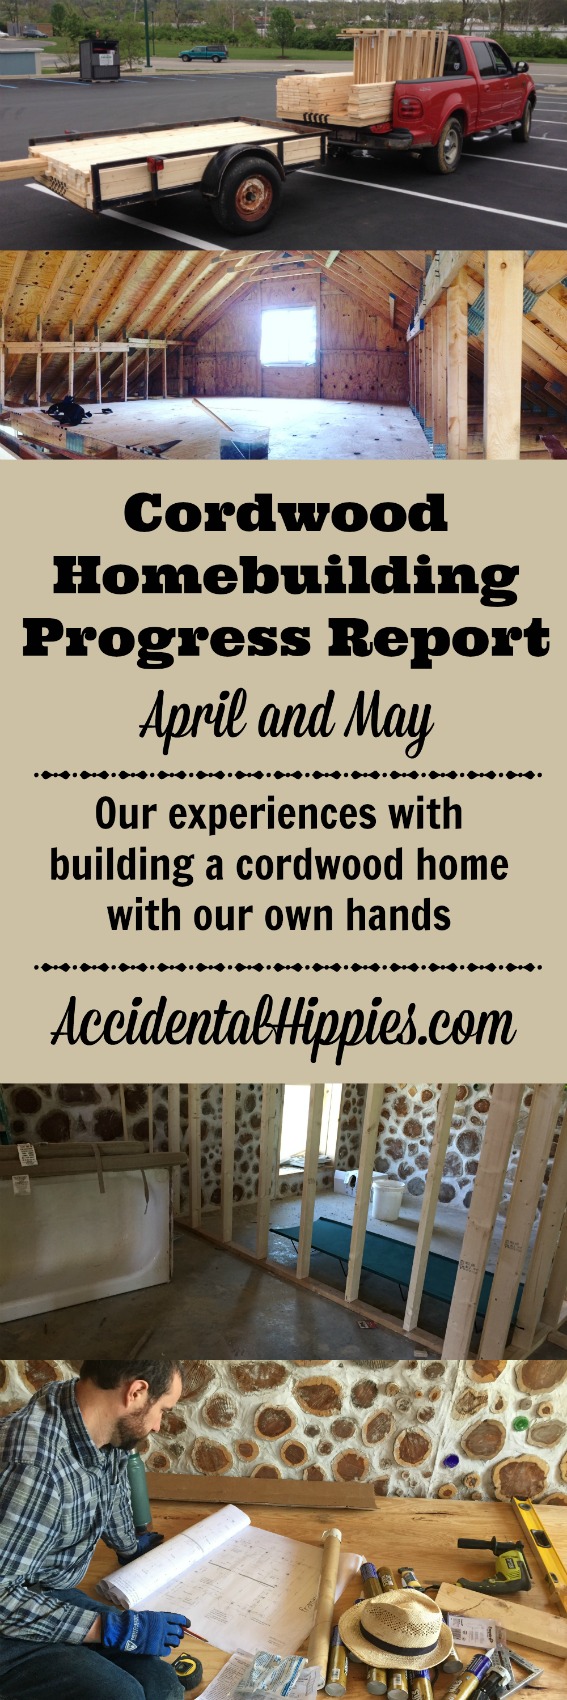 Building a cordwood house | Stud Framing | Subfloor | Quitting job to homestead